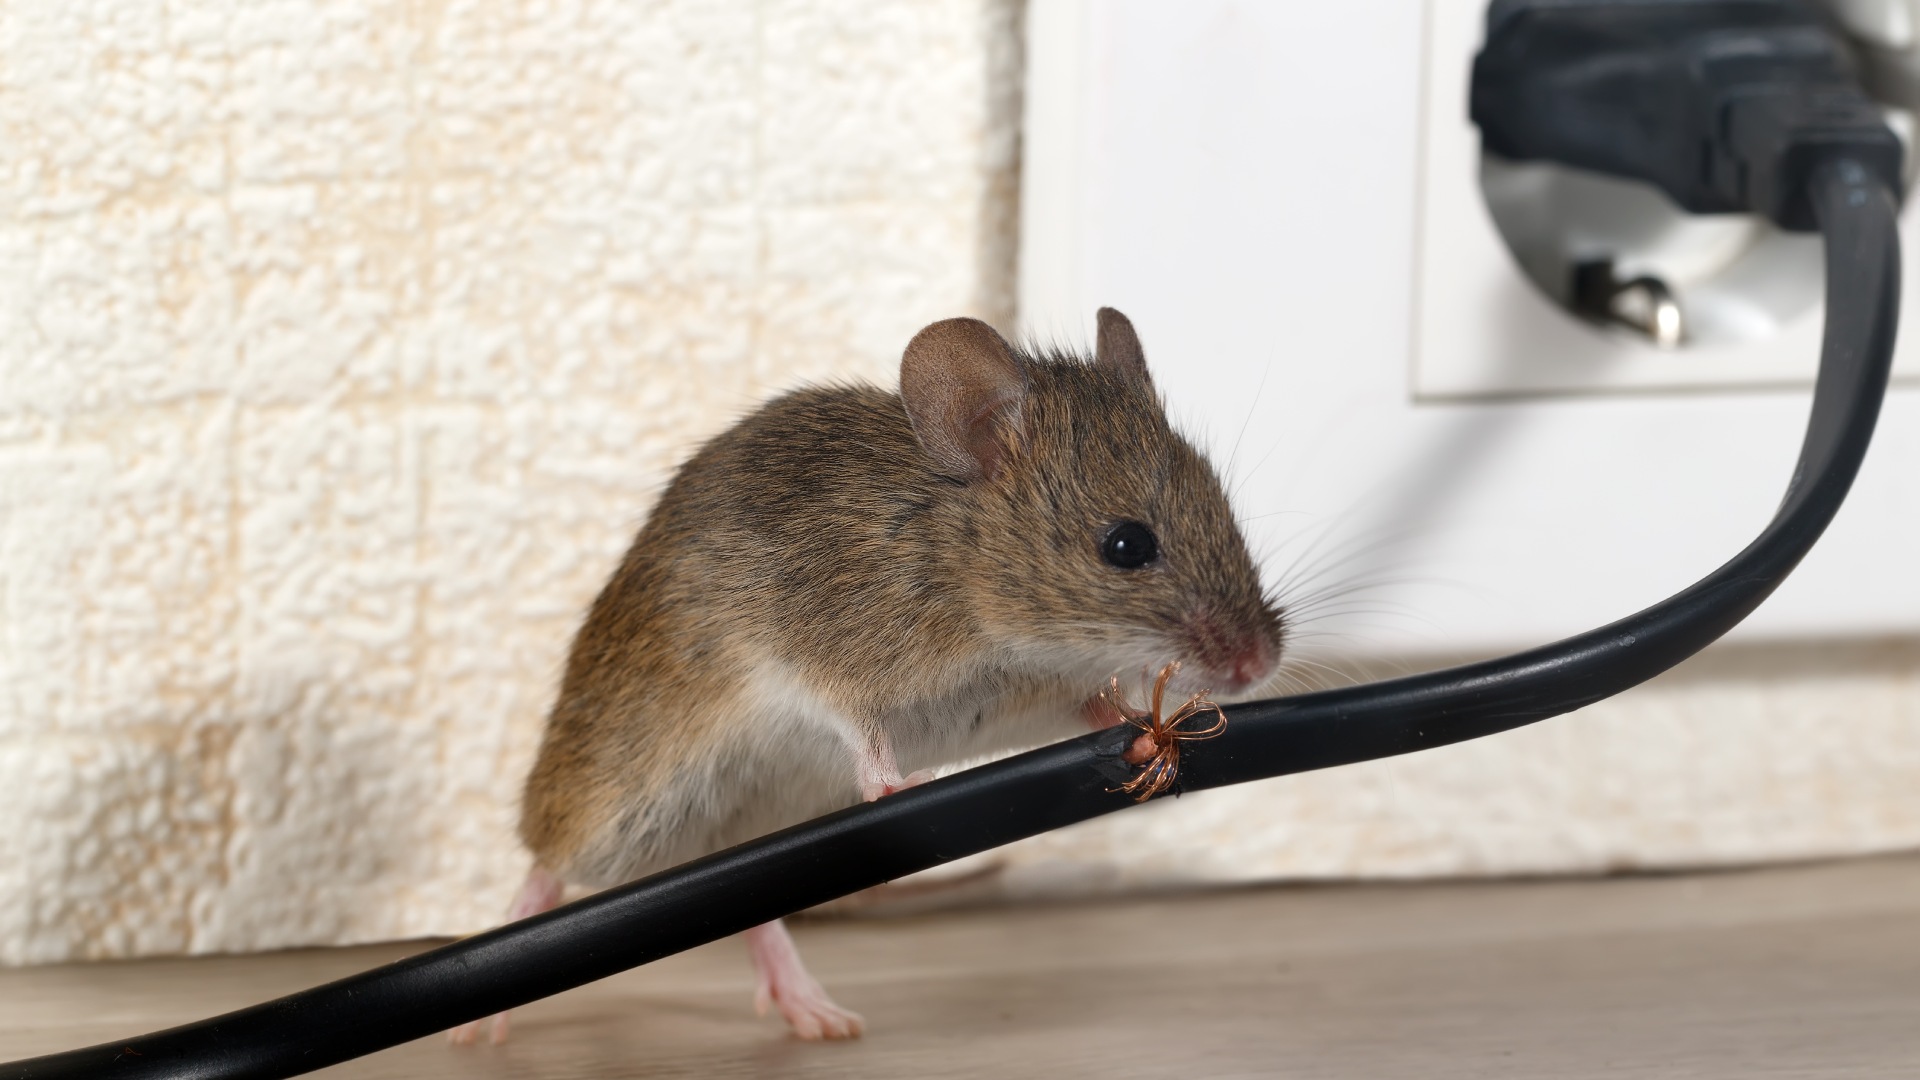 A mouse found chewing wire in home in Escanaba, MI.